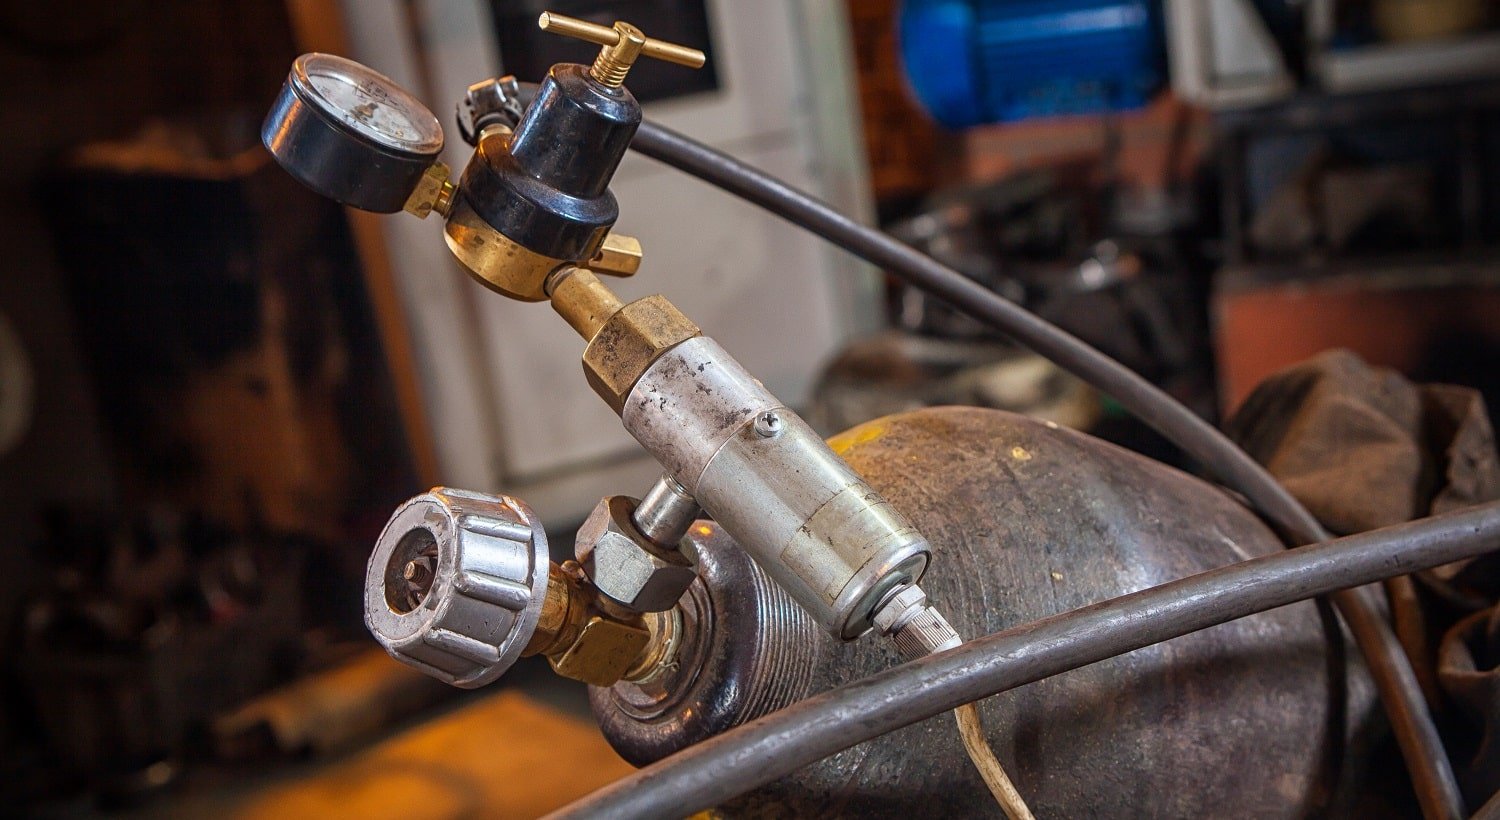 Close-up of a metal gas cylinder with a reducer and a pressure sensor in the background industrial workshop, side view